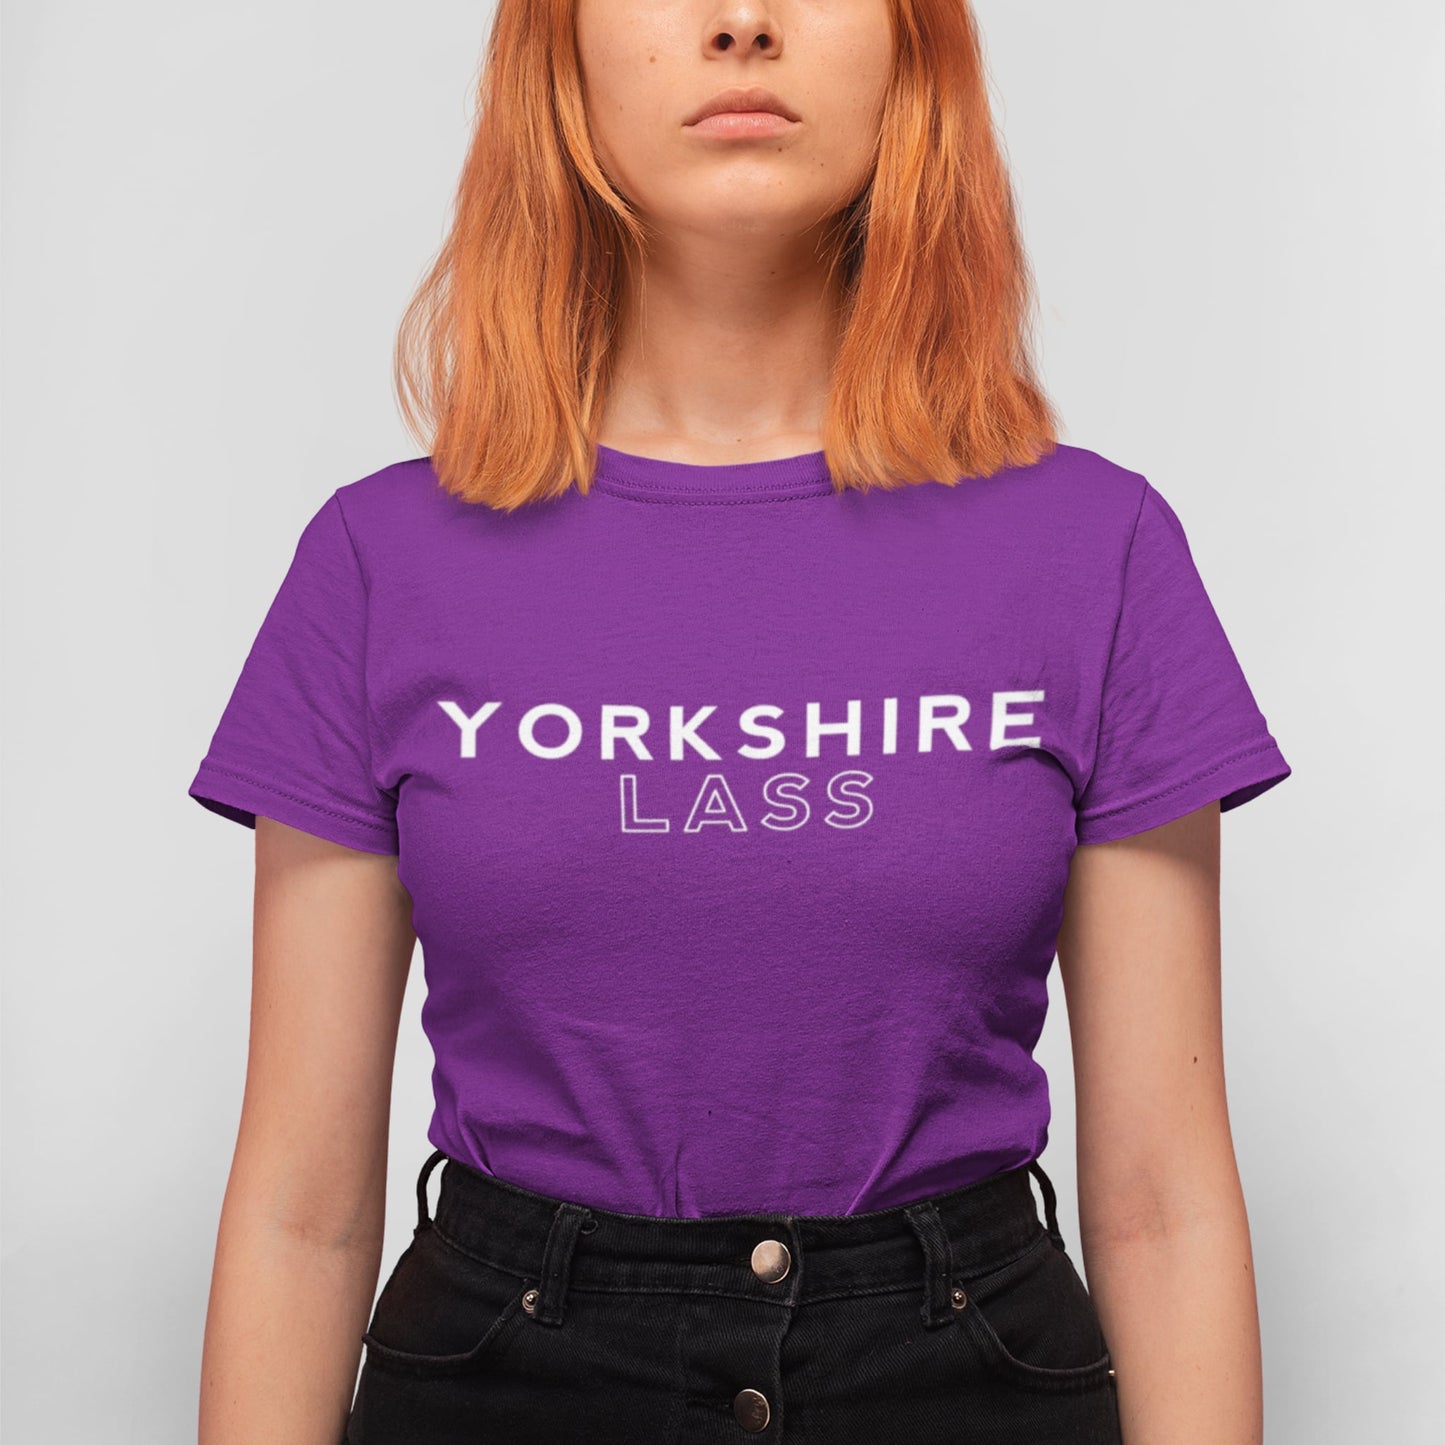 Yorkshire Lass T-Shirt - The Great Yorkshire Shop